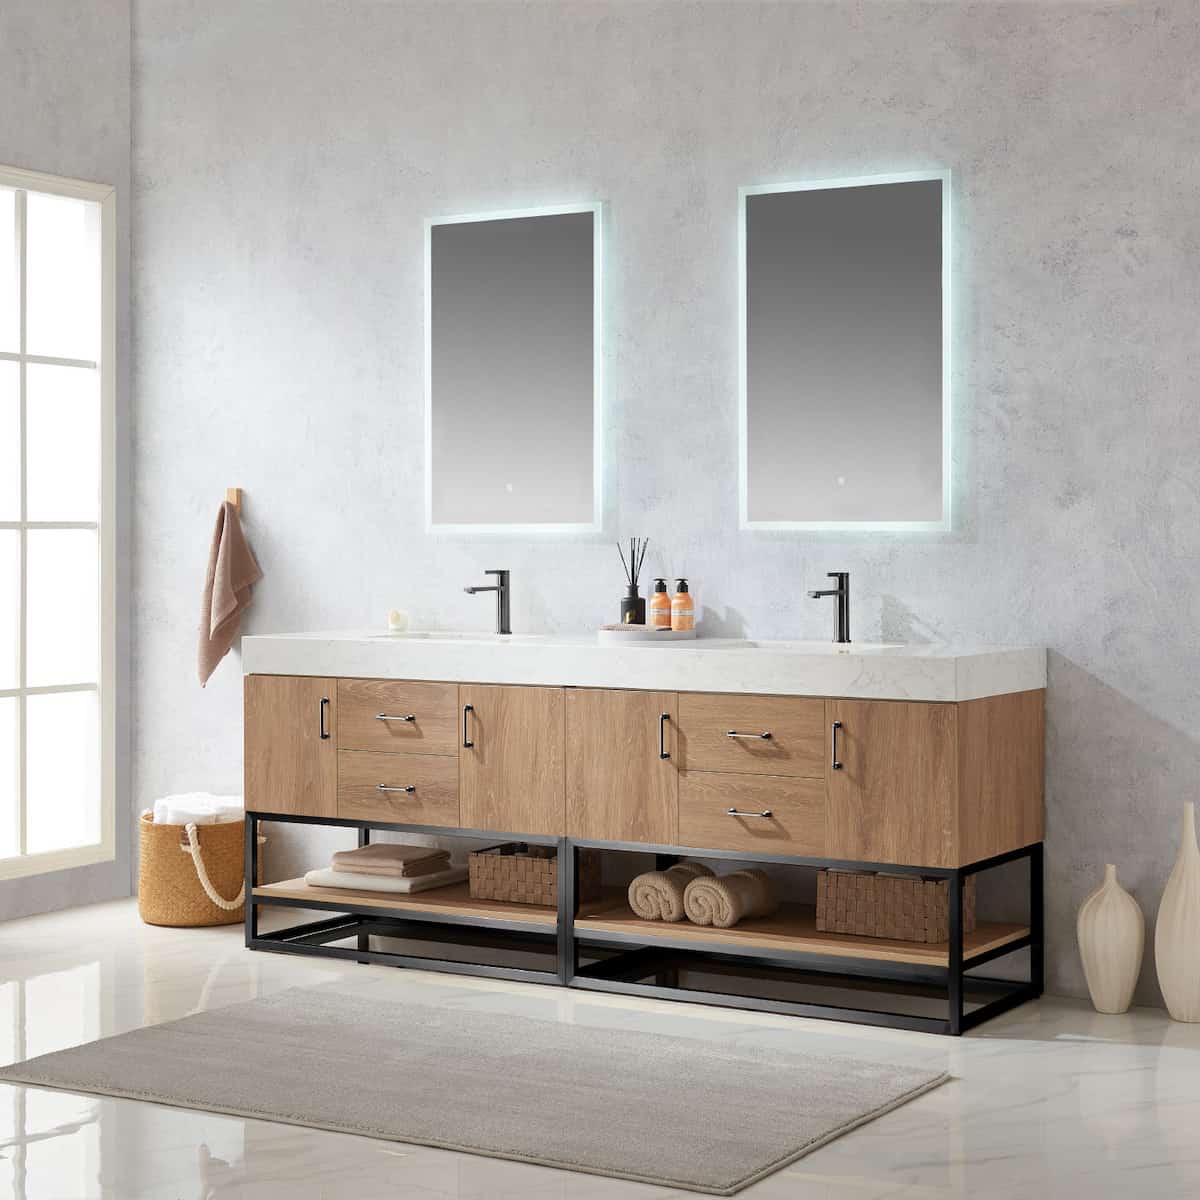 Vinnova Alistair 84 Inch Freestanding Double Vanity in North American Oak and Matte Black Frame with White Grain Stone Countertop With Mirrors Side 789084B-NO-GW